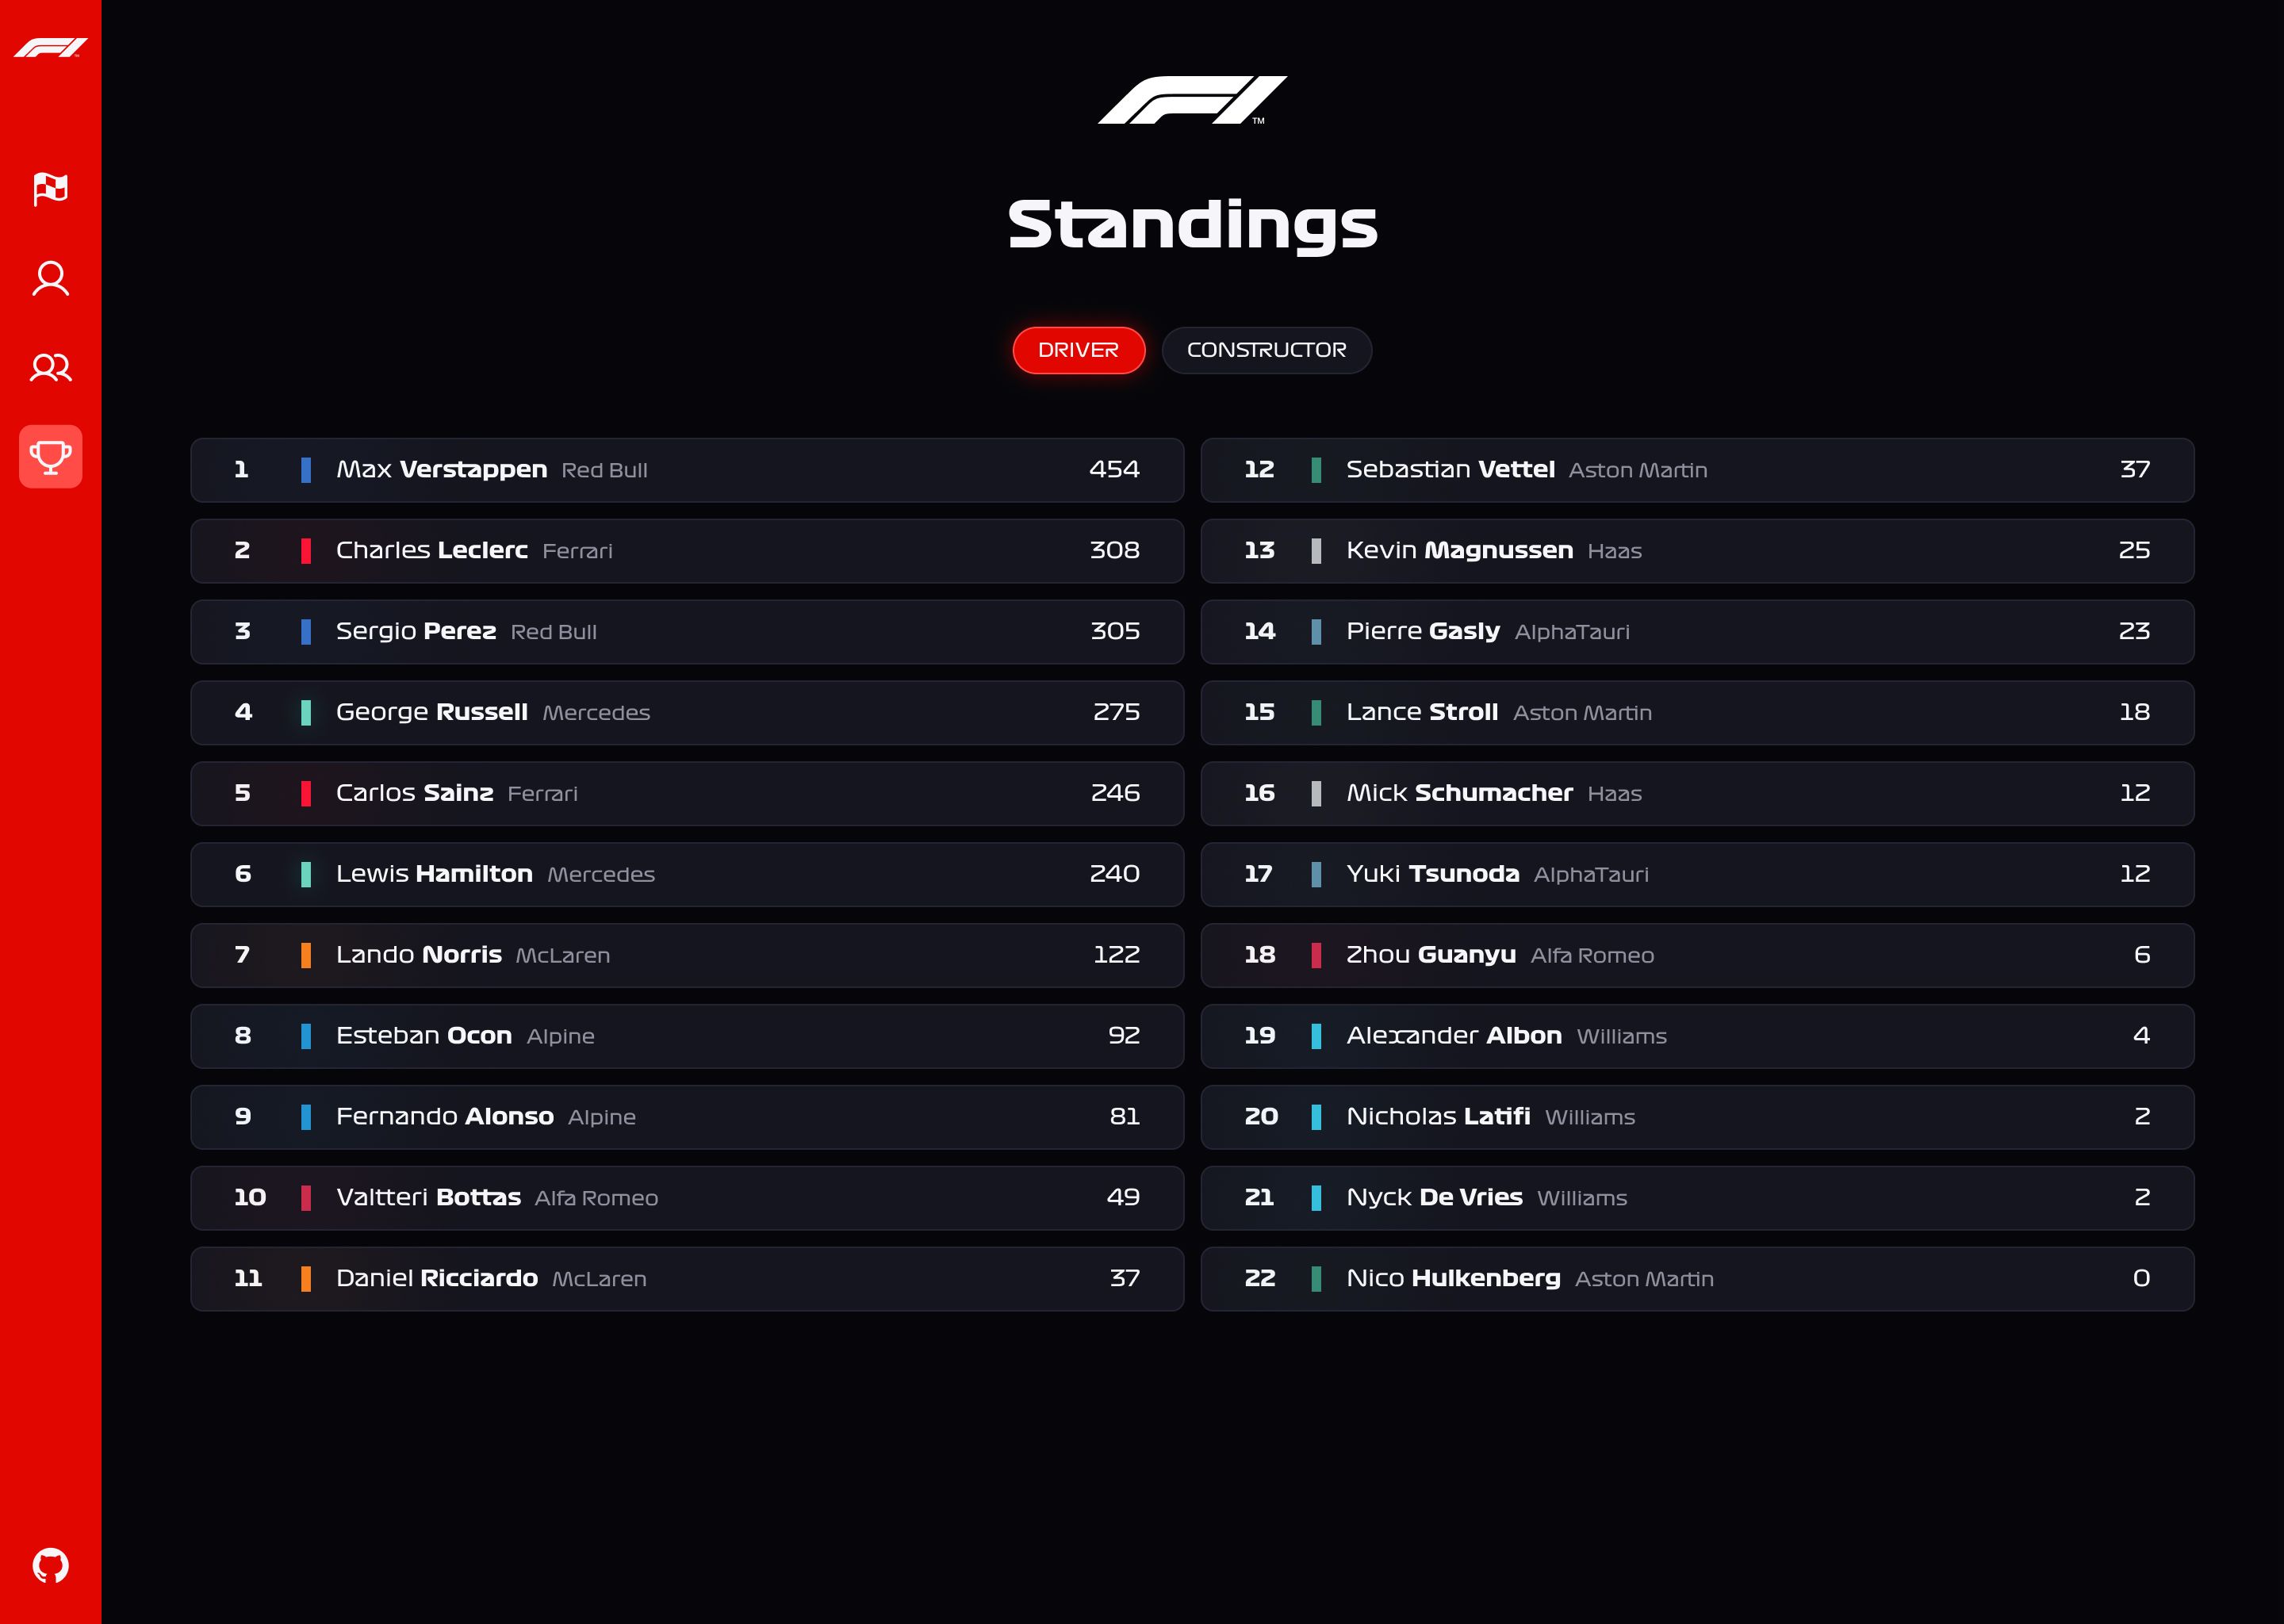 Standings page of F1 Insights, with a large table showing the driver standings